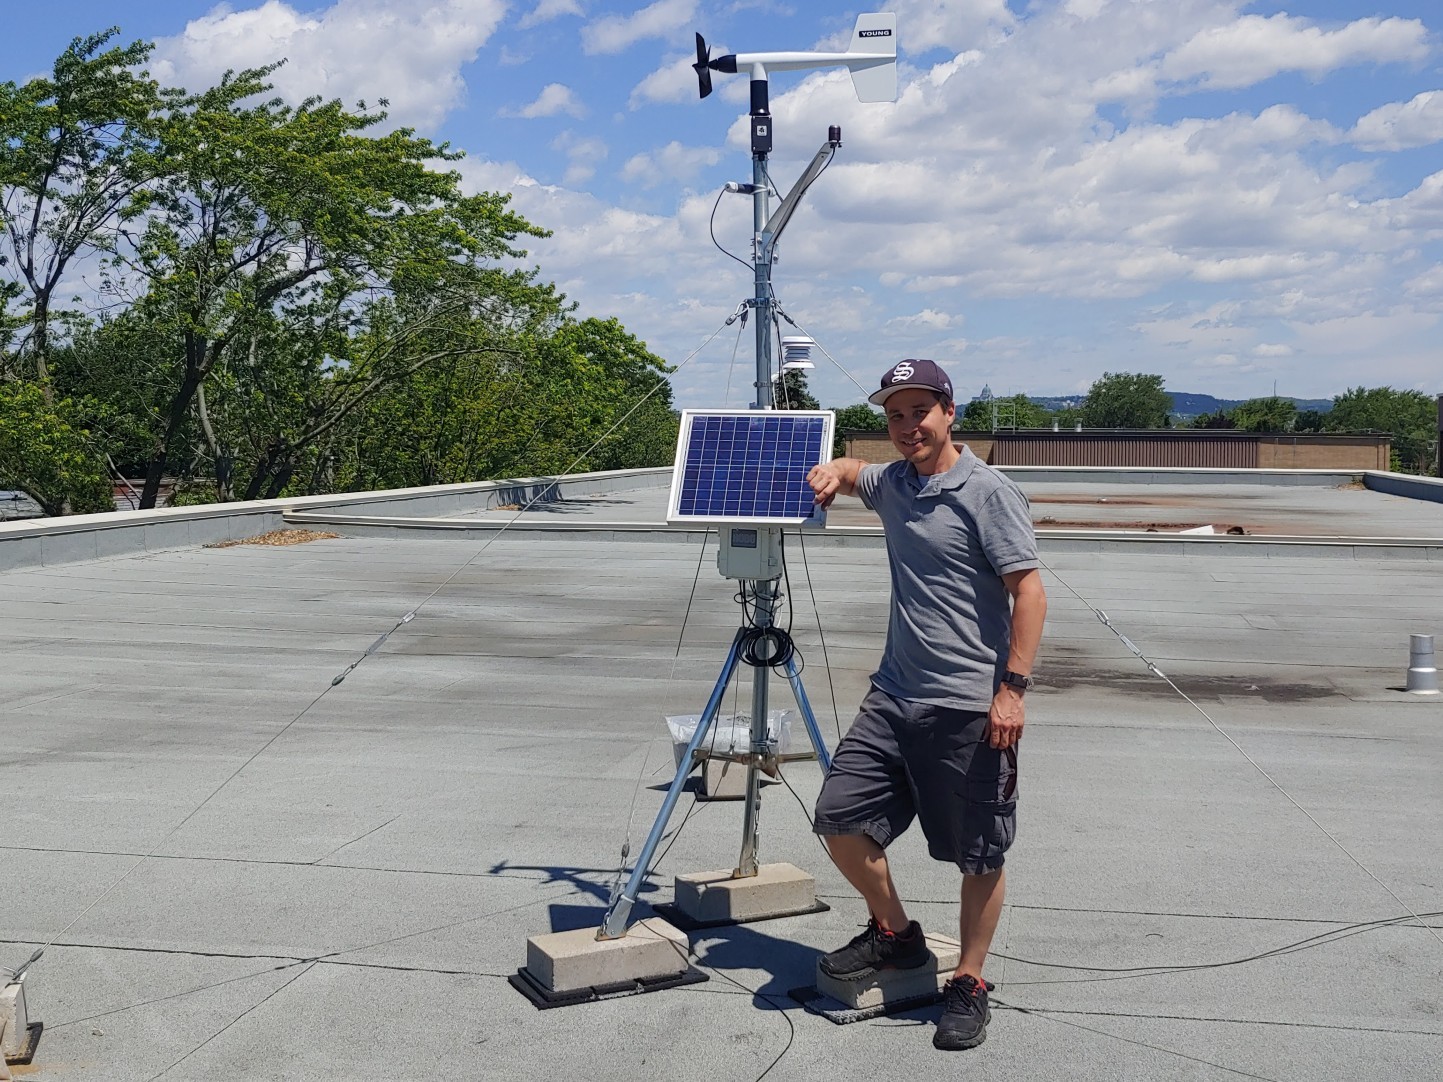 Student Daniel Baril standing on a rooftop next to weather monitoring equipment, including a solar panel, anemometer, and various sensors, against a backdrop of trees and a clear, partly cloudy sky.